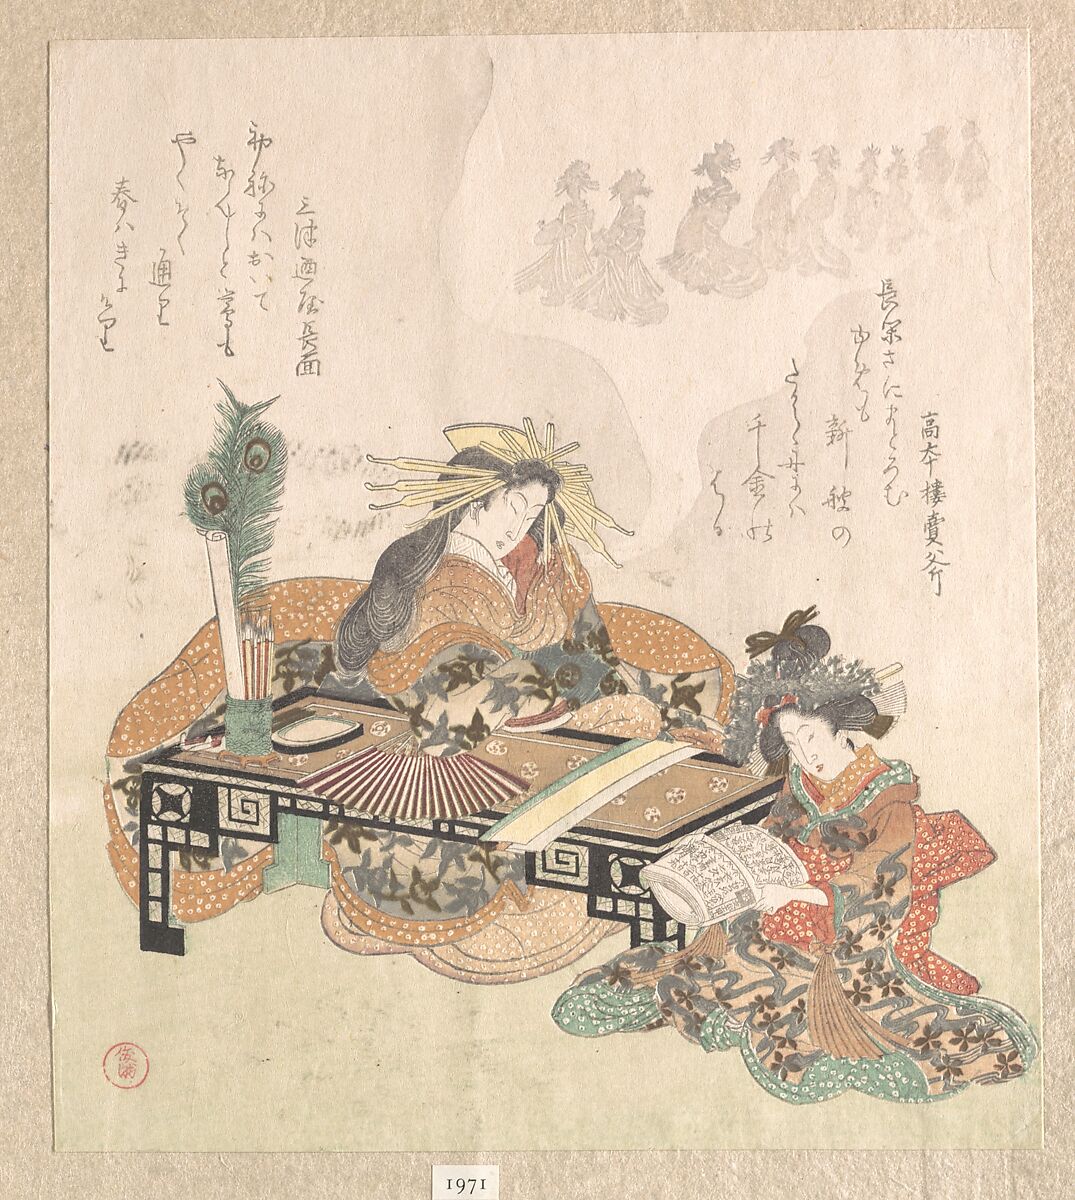 Courtesan Dreaming of the New Year Procession, Kubo Shunman (Japanese, 1757–1820) (?), Woodblock print (surimono); ink and color on paper, Japan 